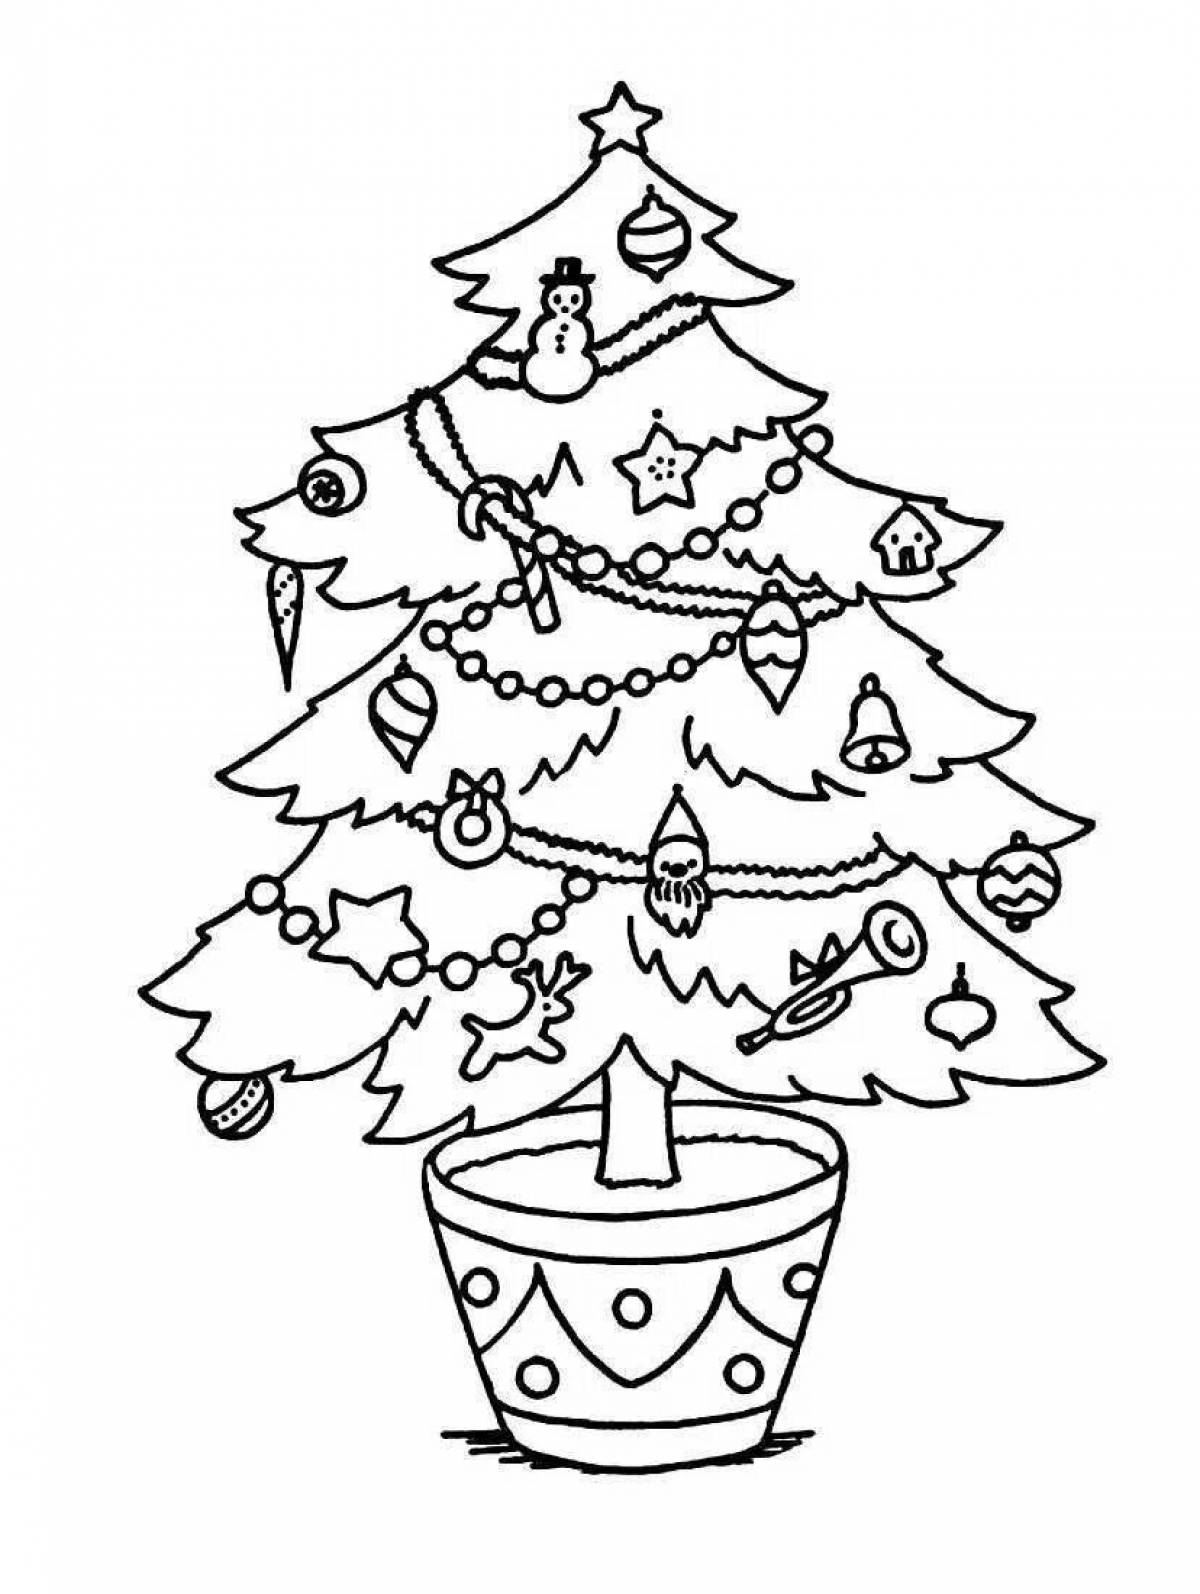 Great coloring book for girls tree